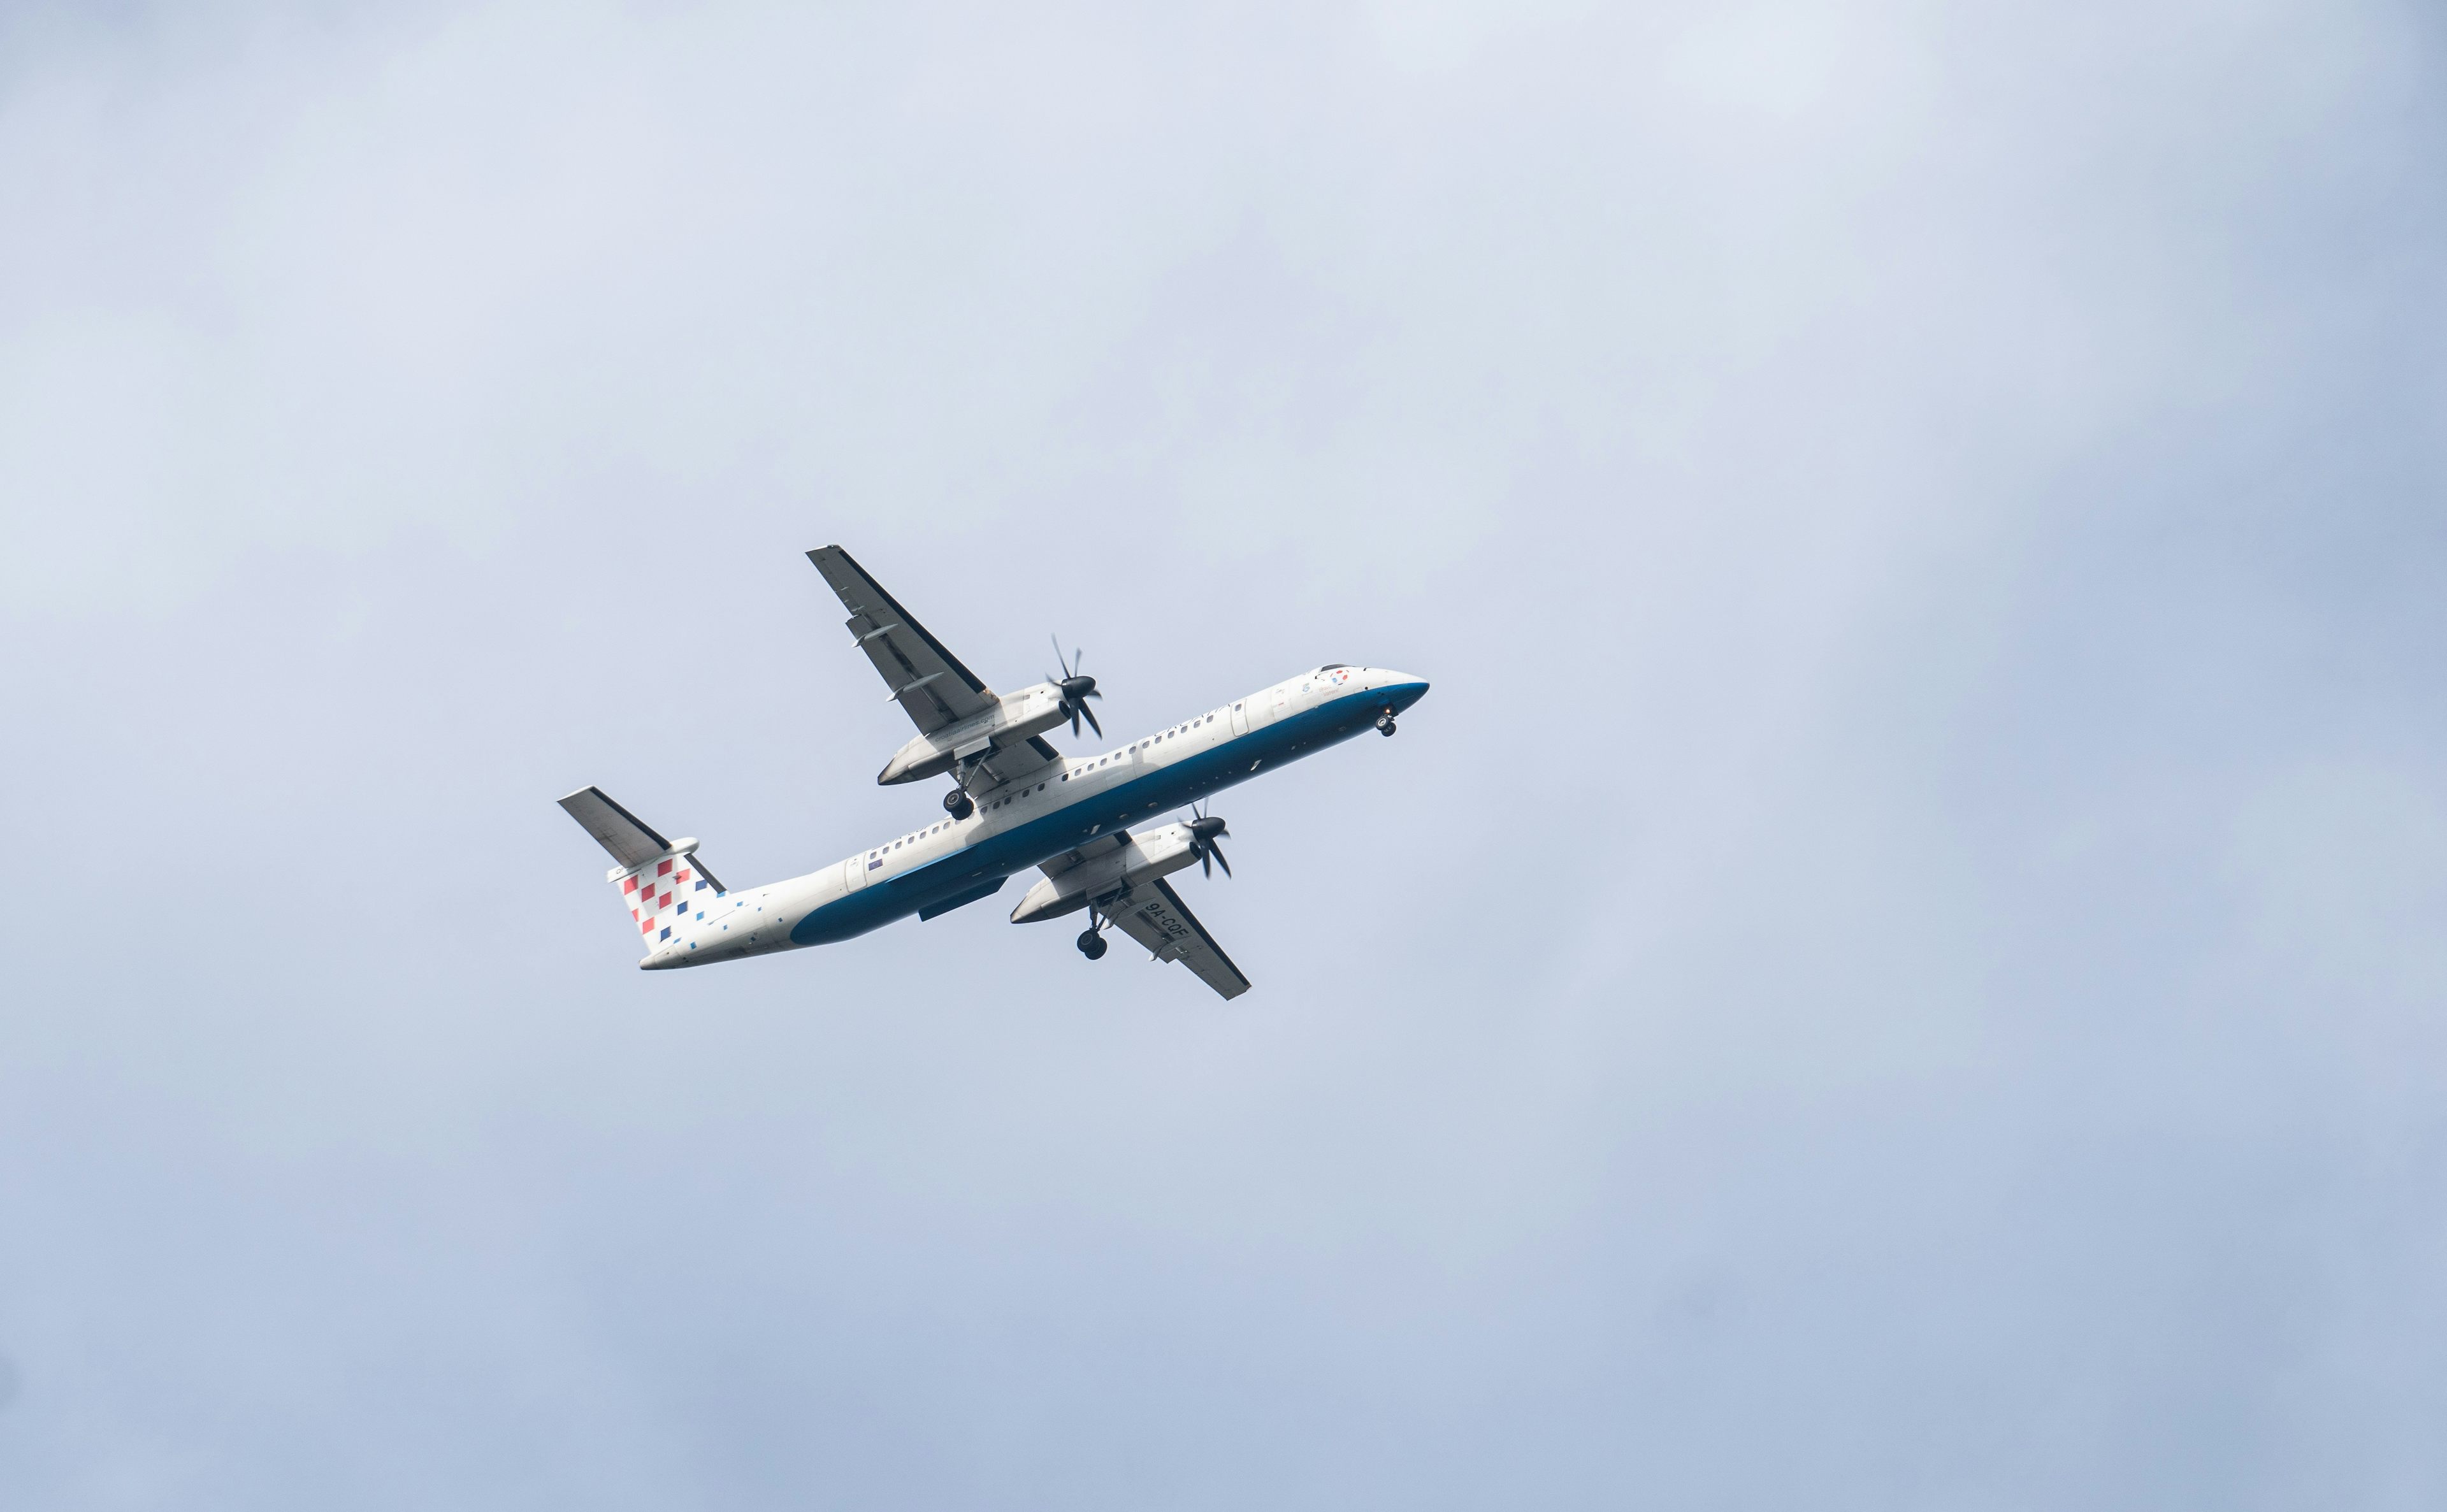 A Croatia Airlines plane in the sky